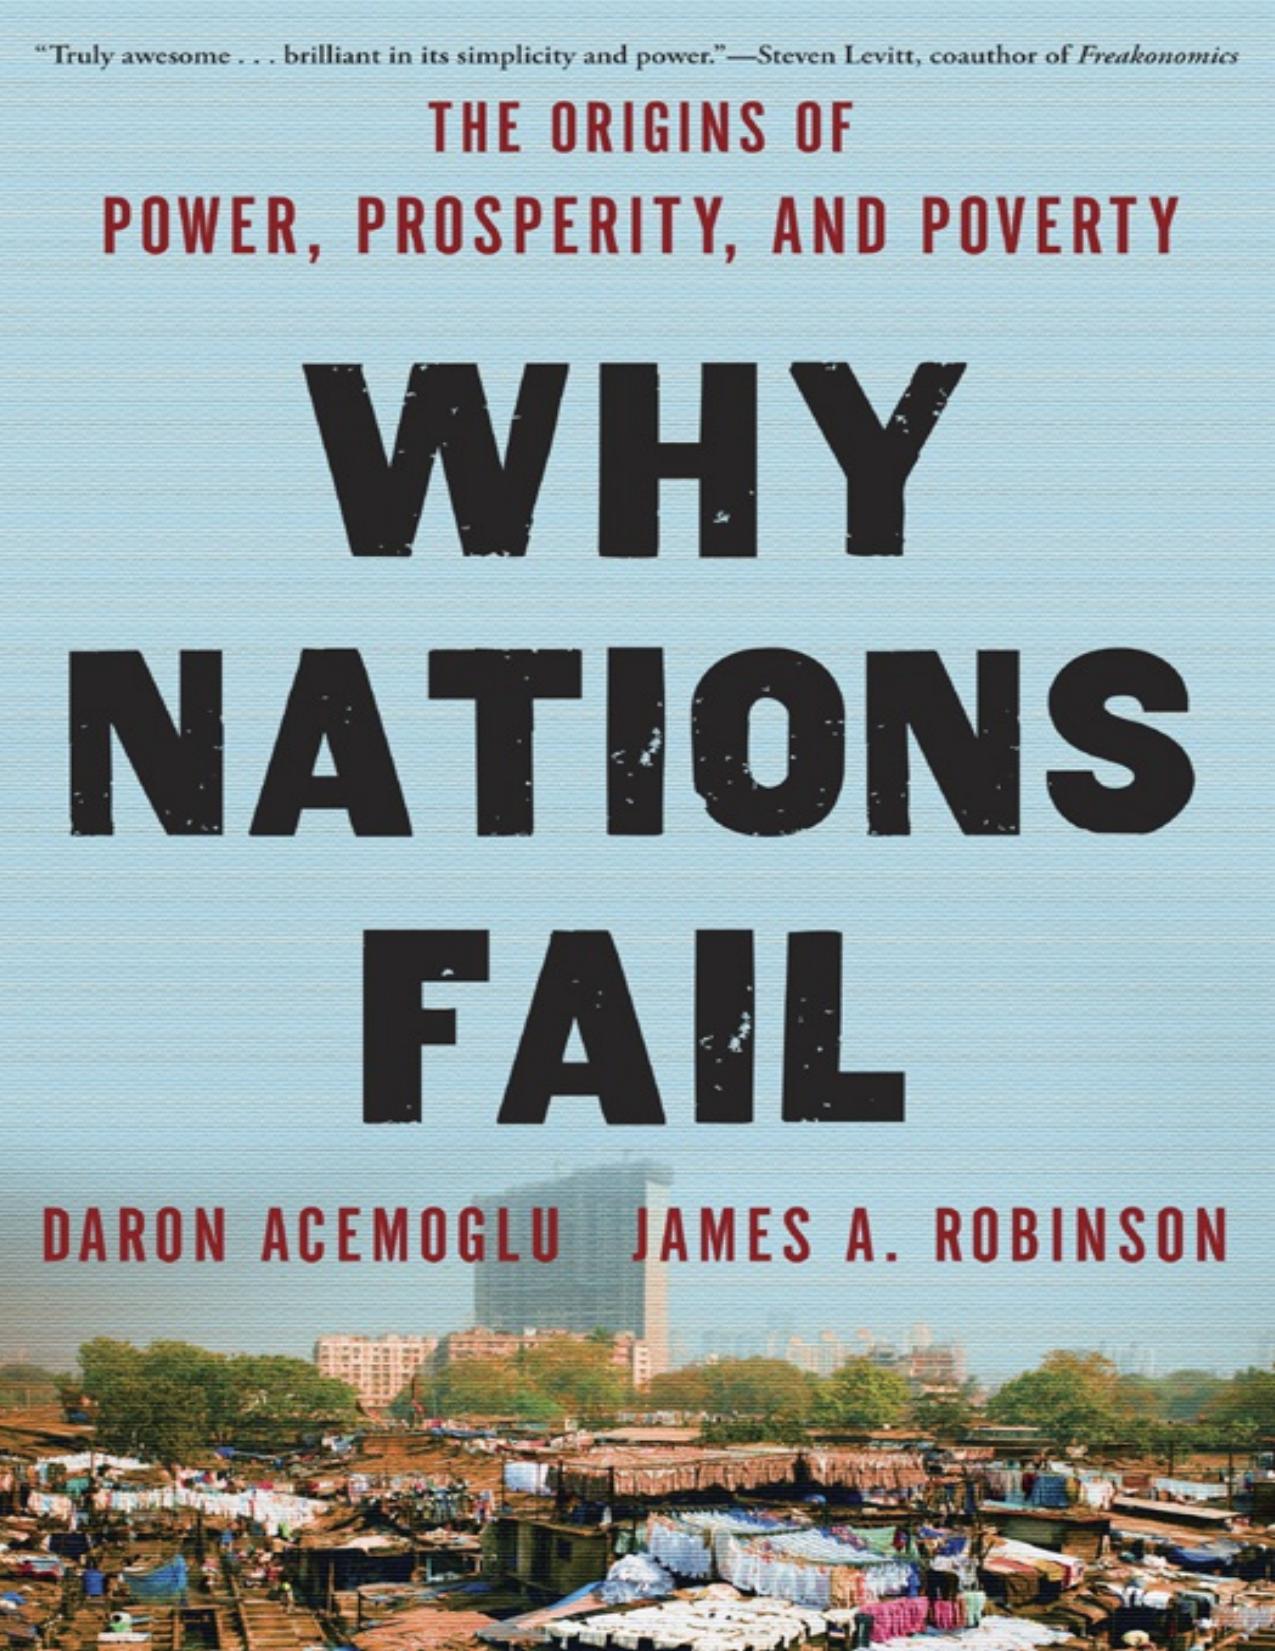 Why Nations Fail: The Origins of Power, Prosperity, and Poverty by Daron Acemoglu & James Robinson